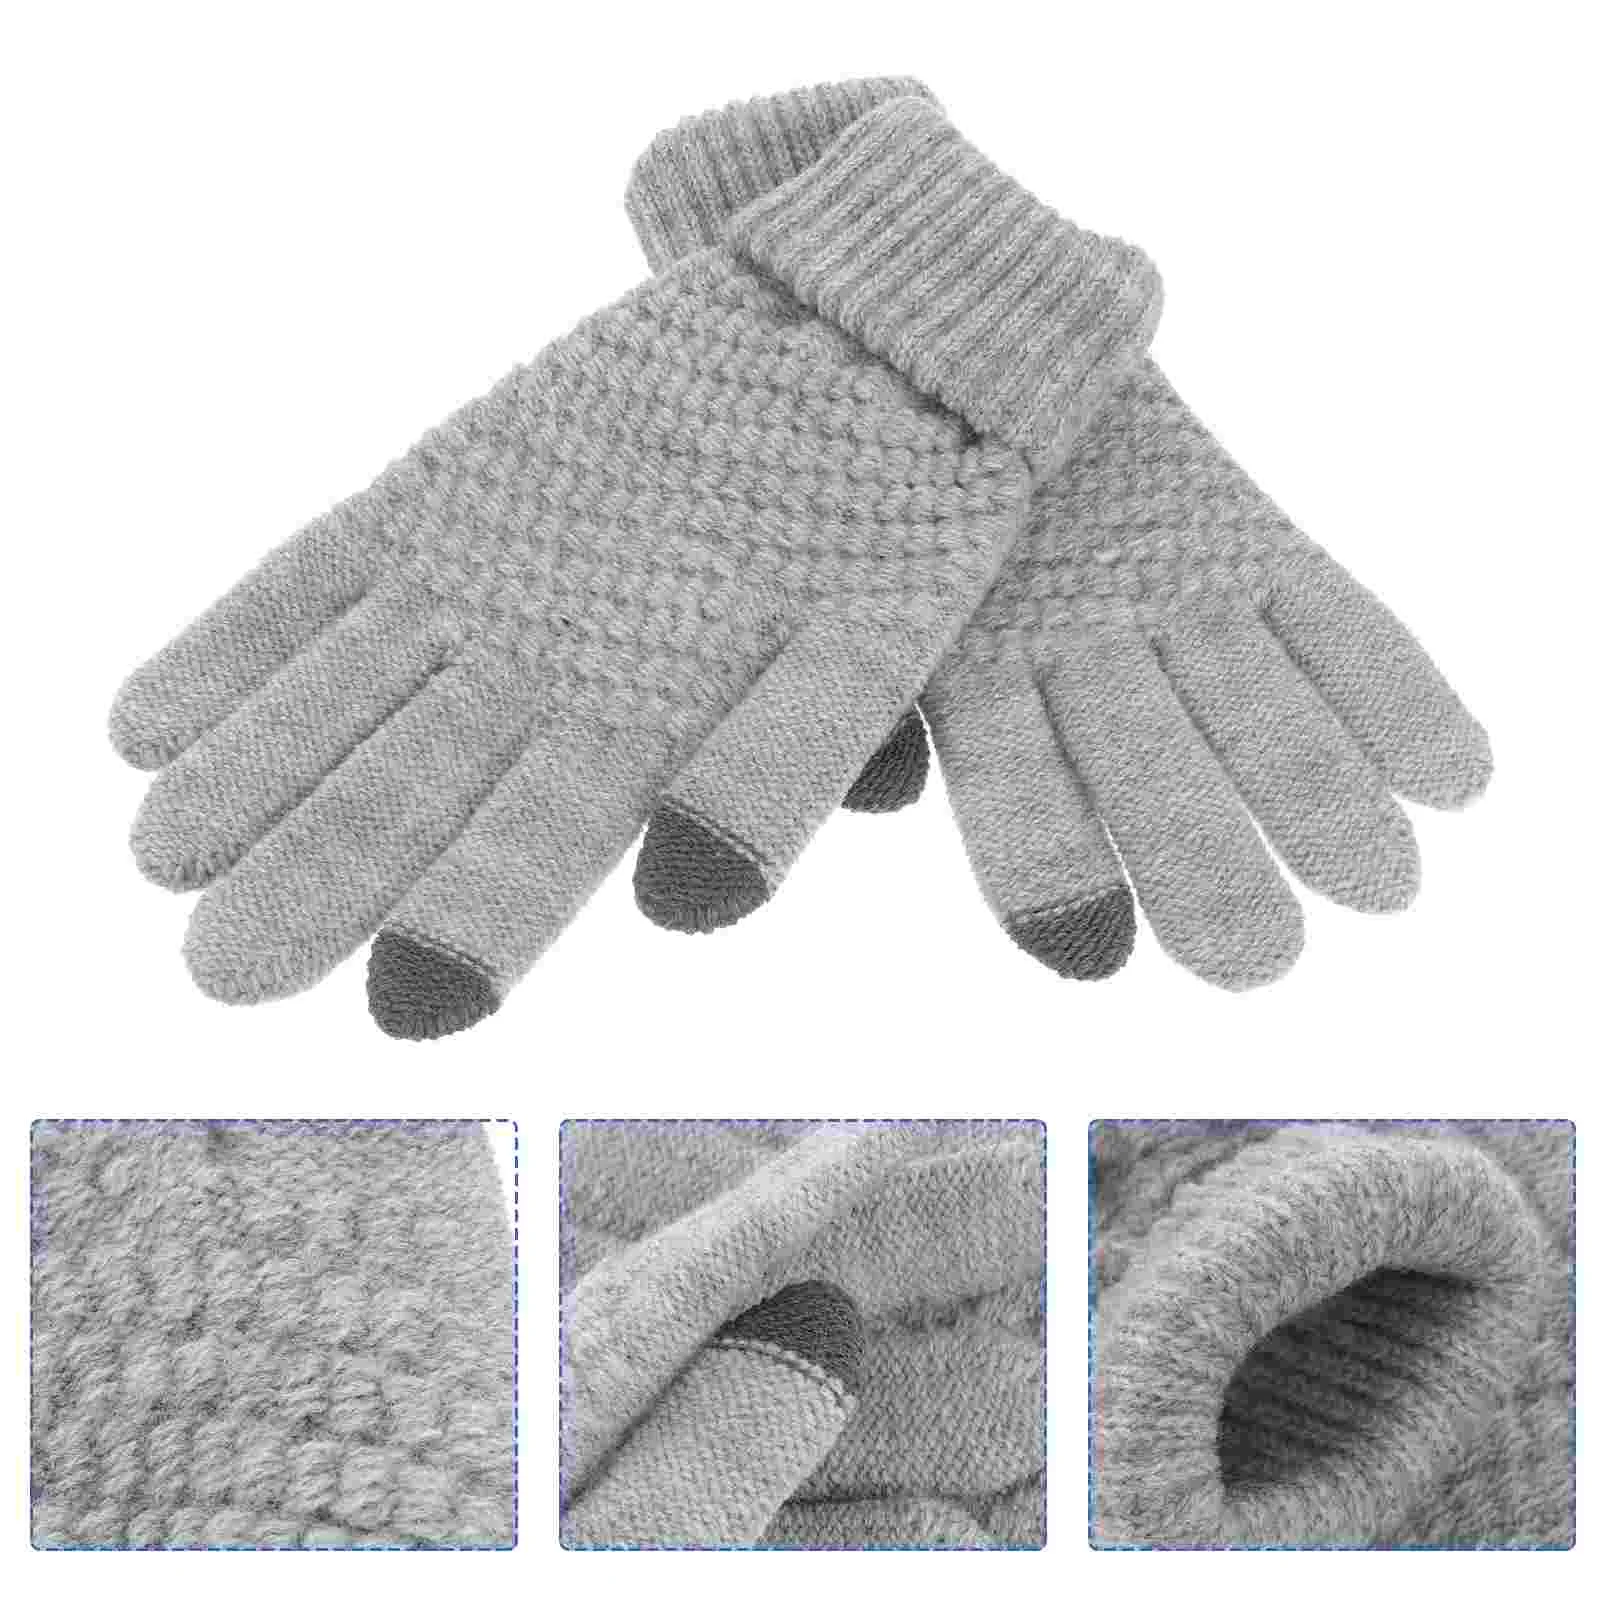 

Pair of Wool Knitted Gloves for Touch Screen Cellphone / Tablet / MP5 (Grey)